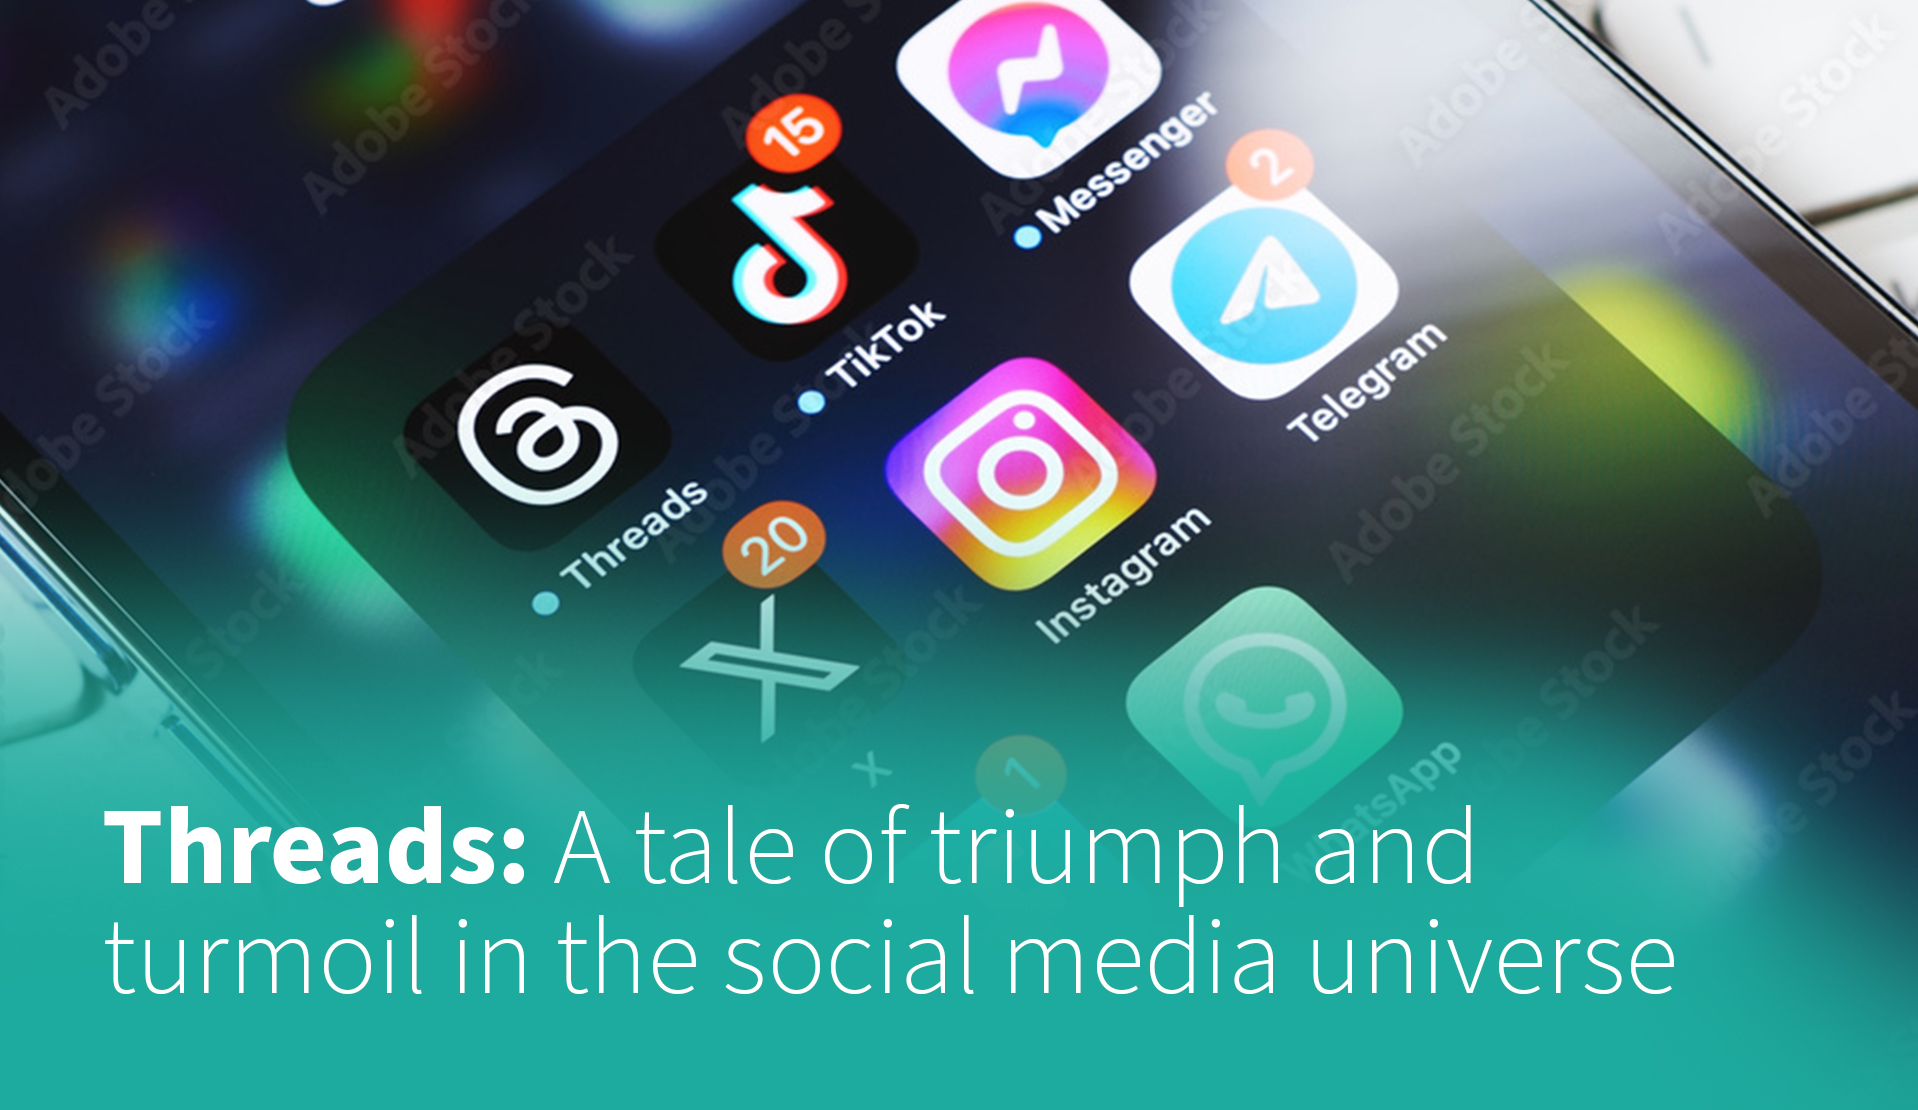 Threads: A tale of triumph and turmoil in the social media universe